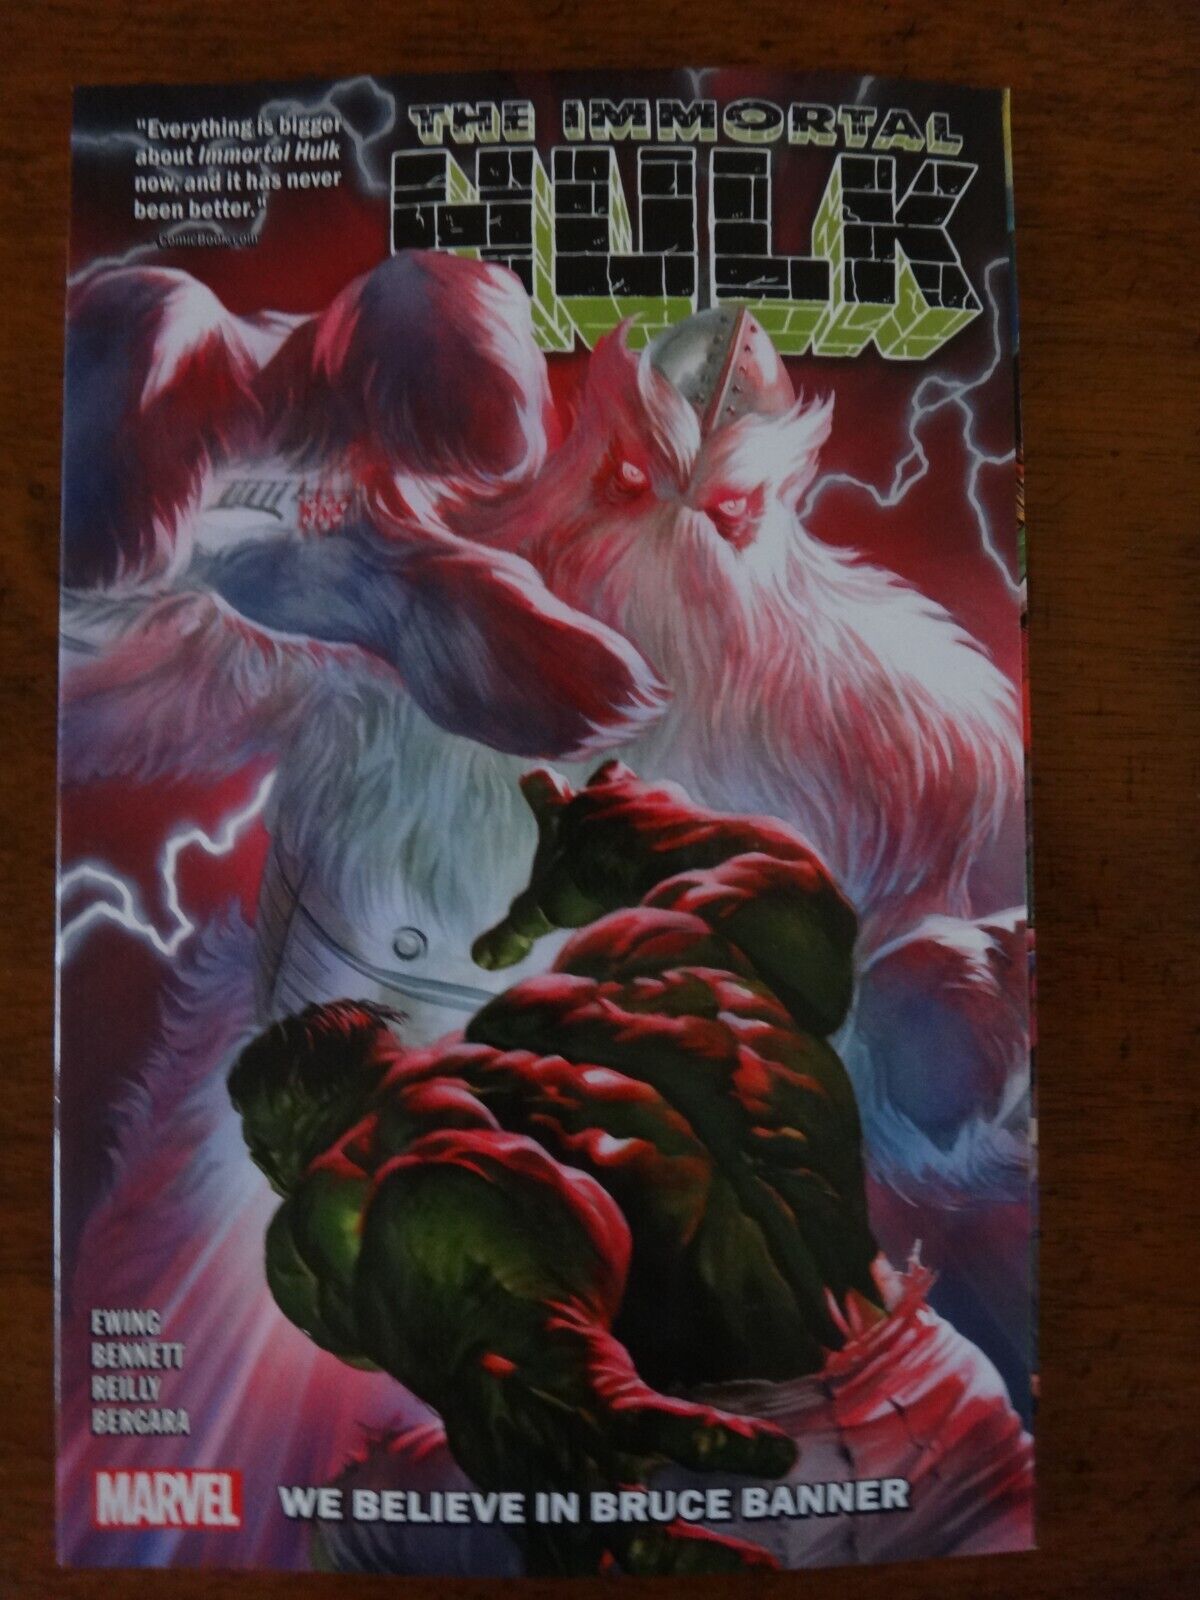 The Immortal Hulk #6: We Believe in Bruce Banner (Marvel 2020) 9781302920500 NEW